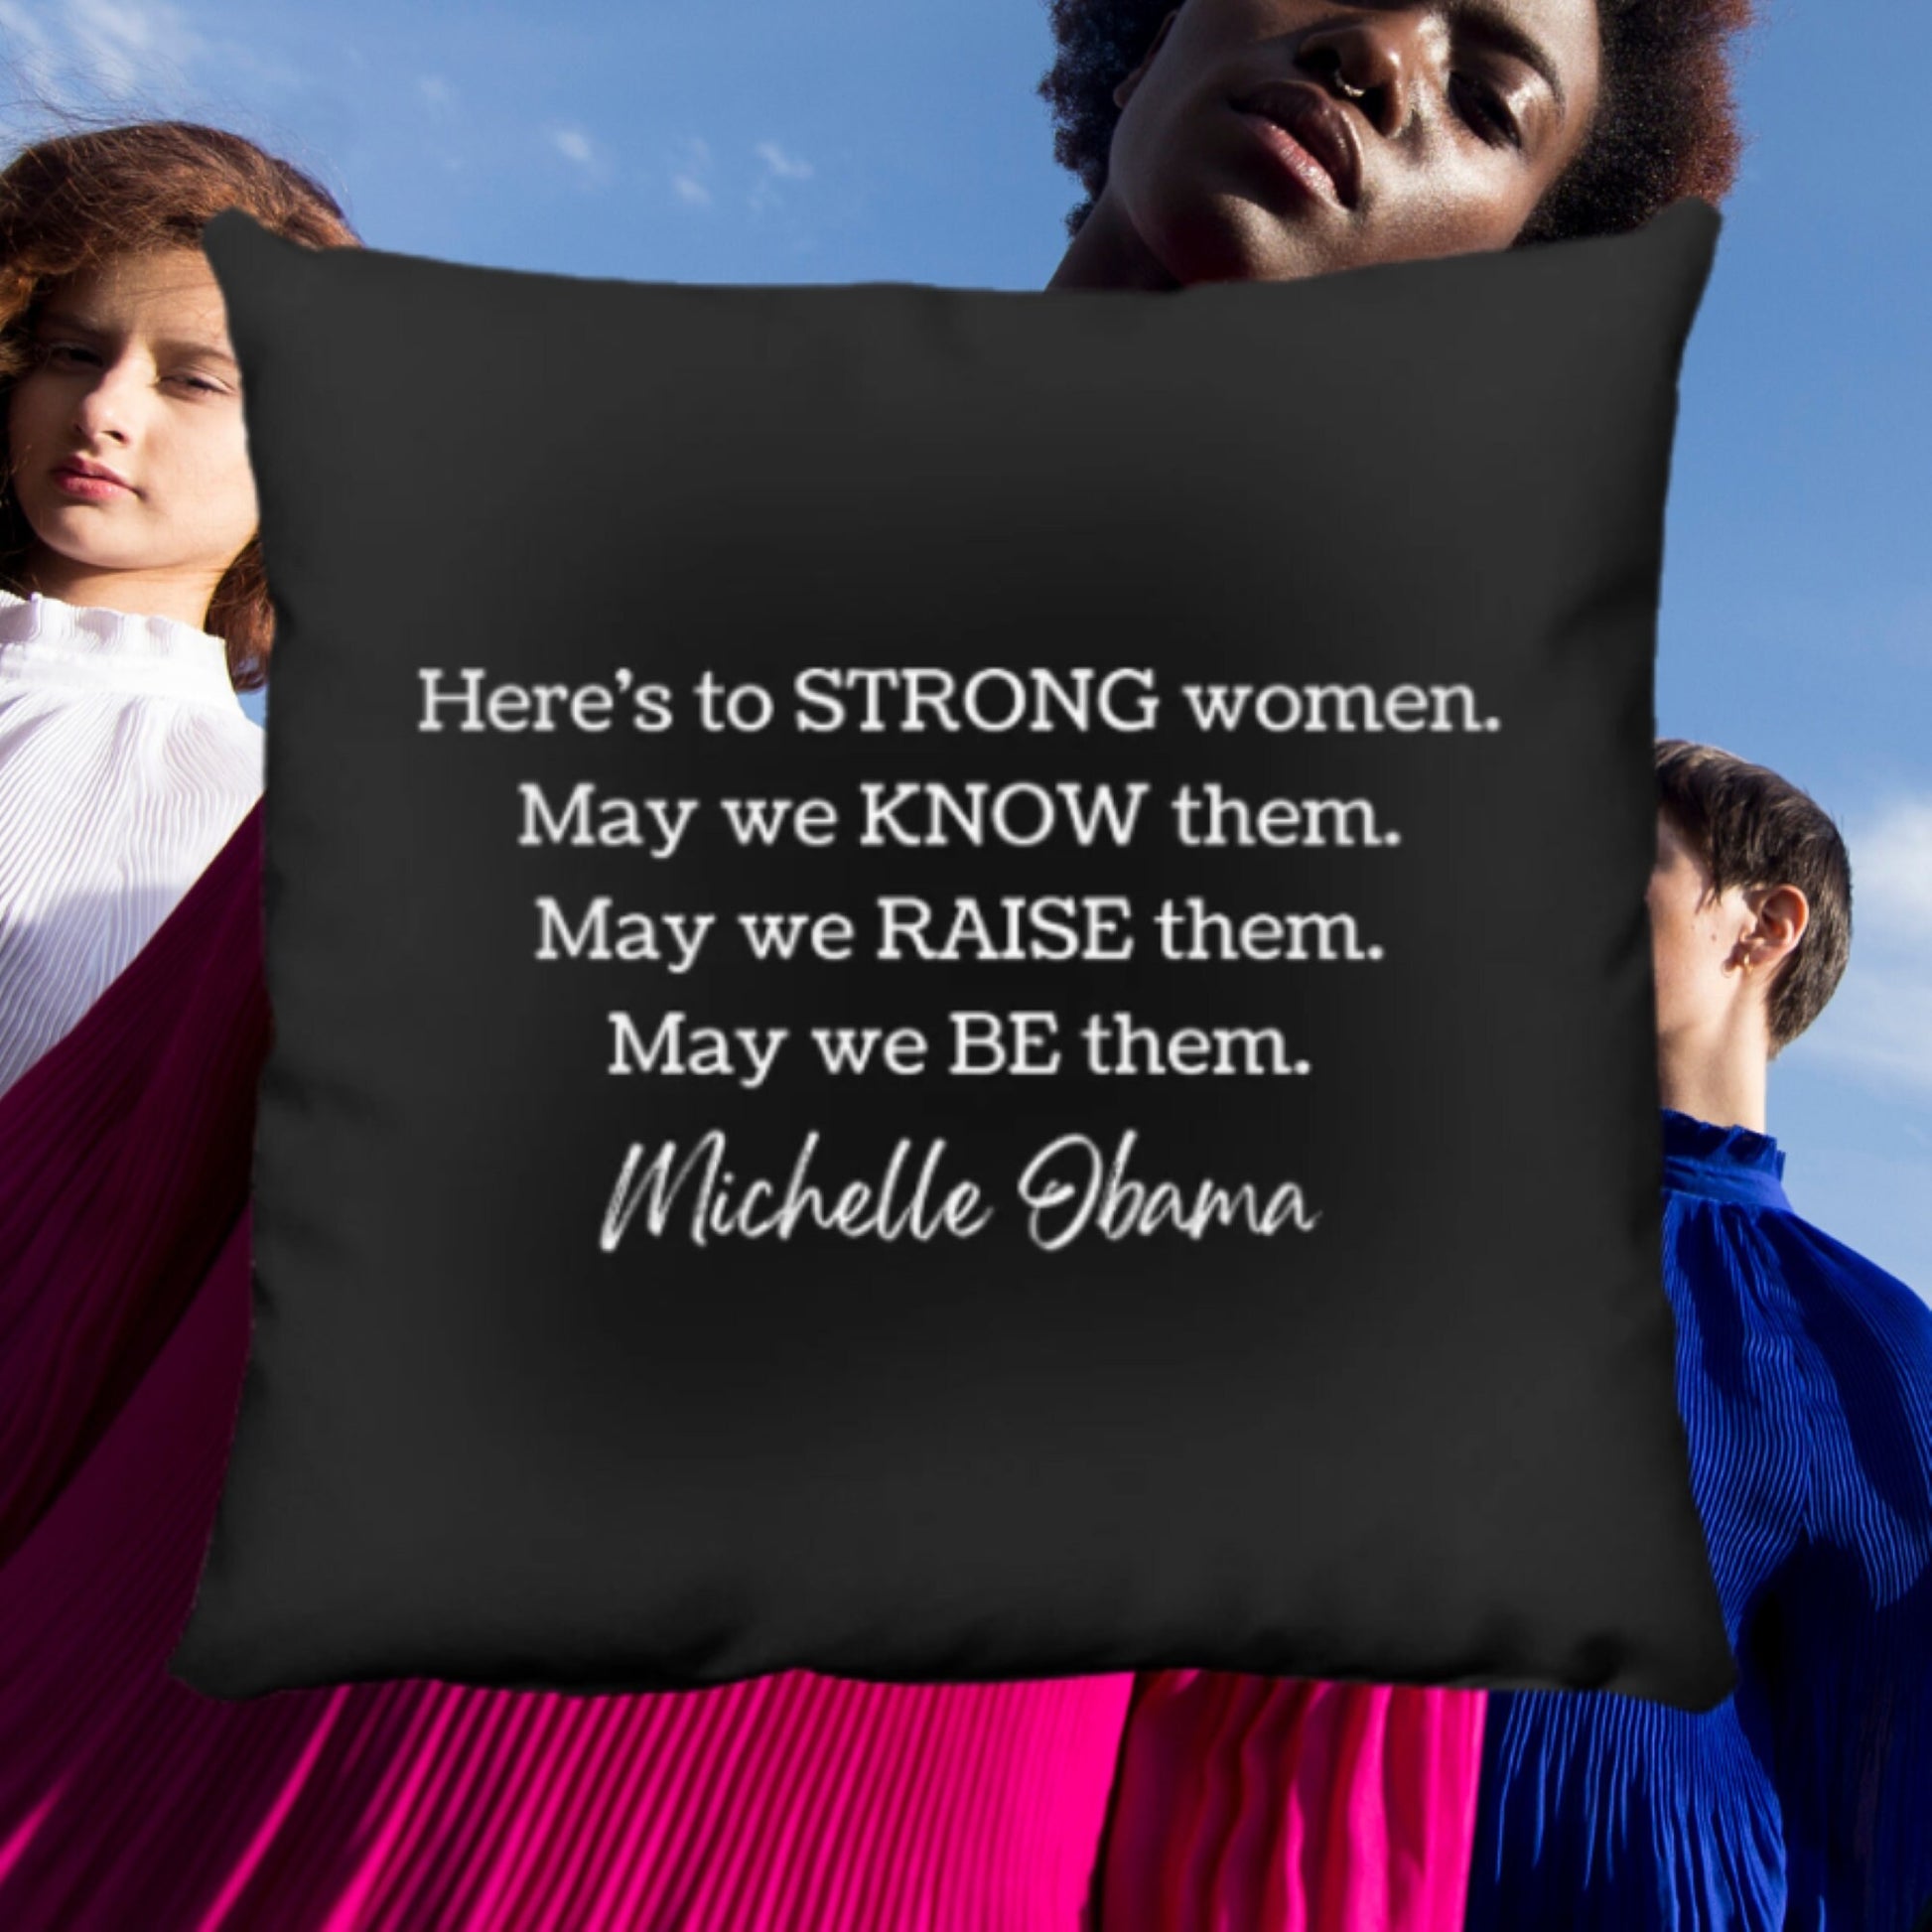 Michelle Obama Here's To Strong Women Quote Feminist Throw Pillow